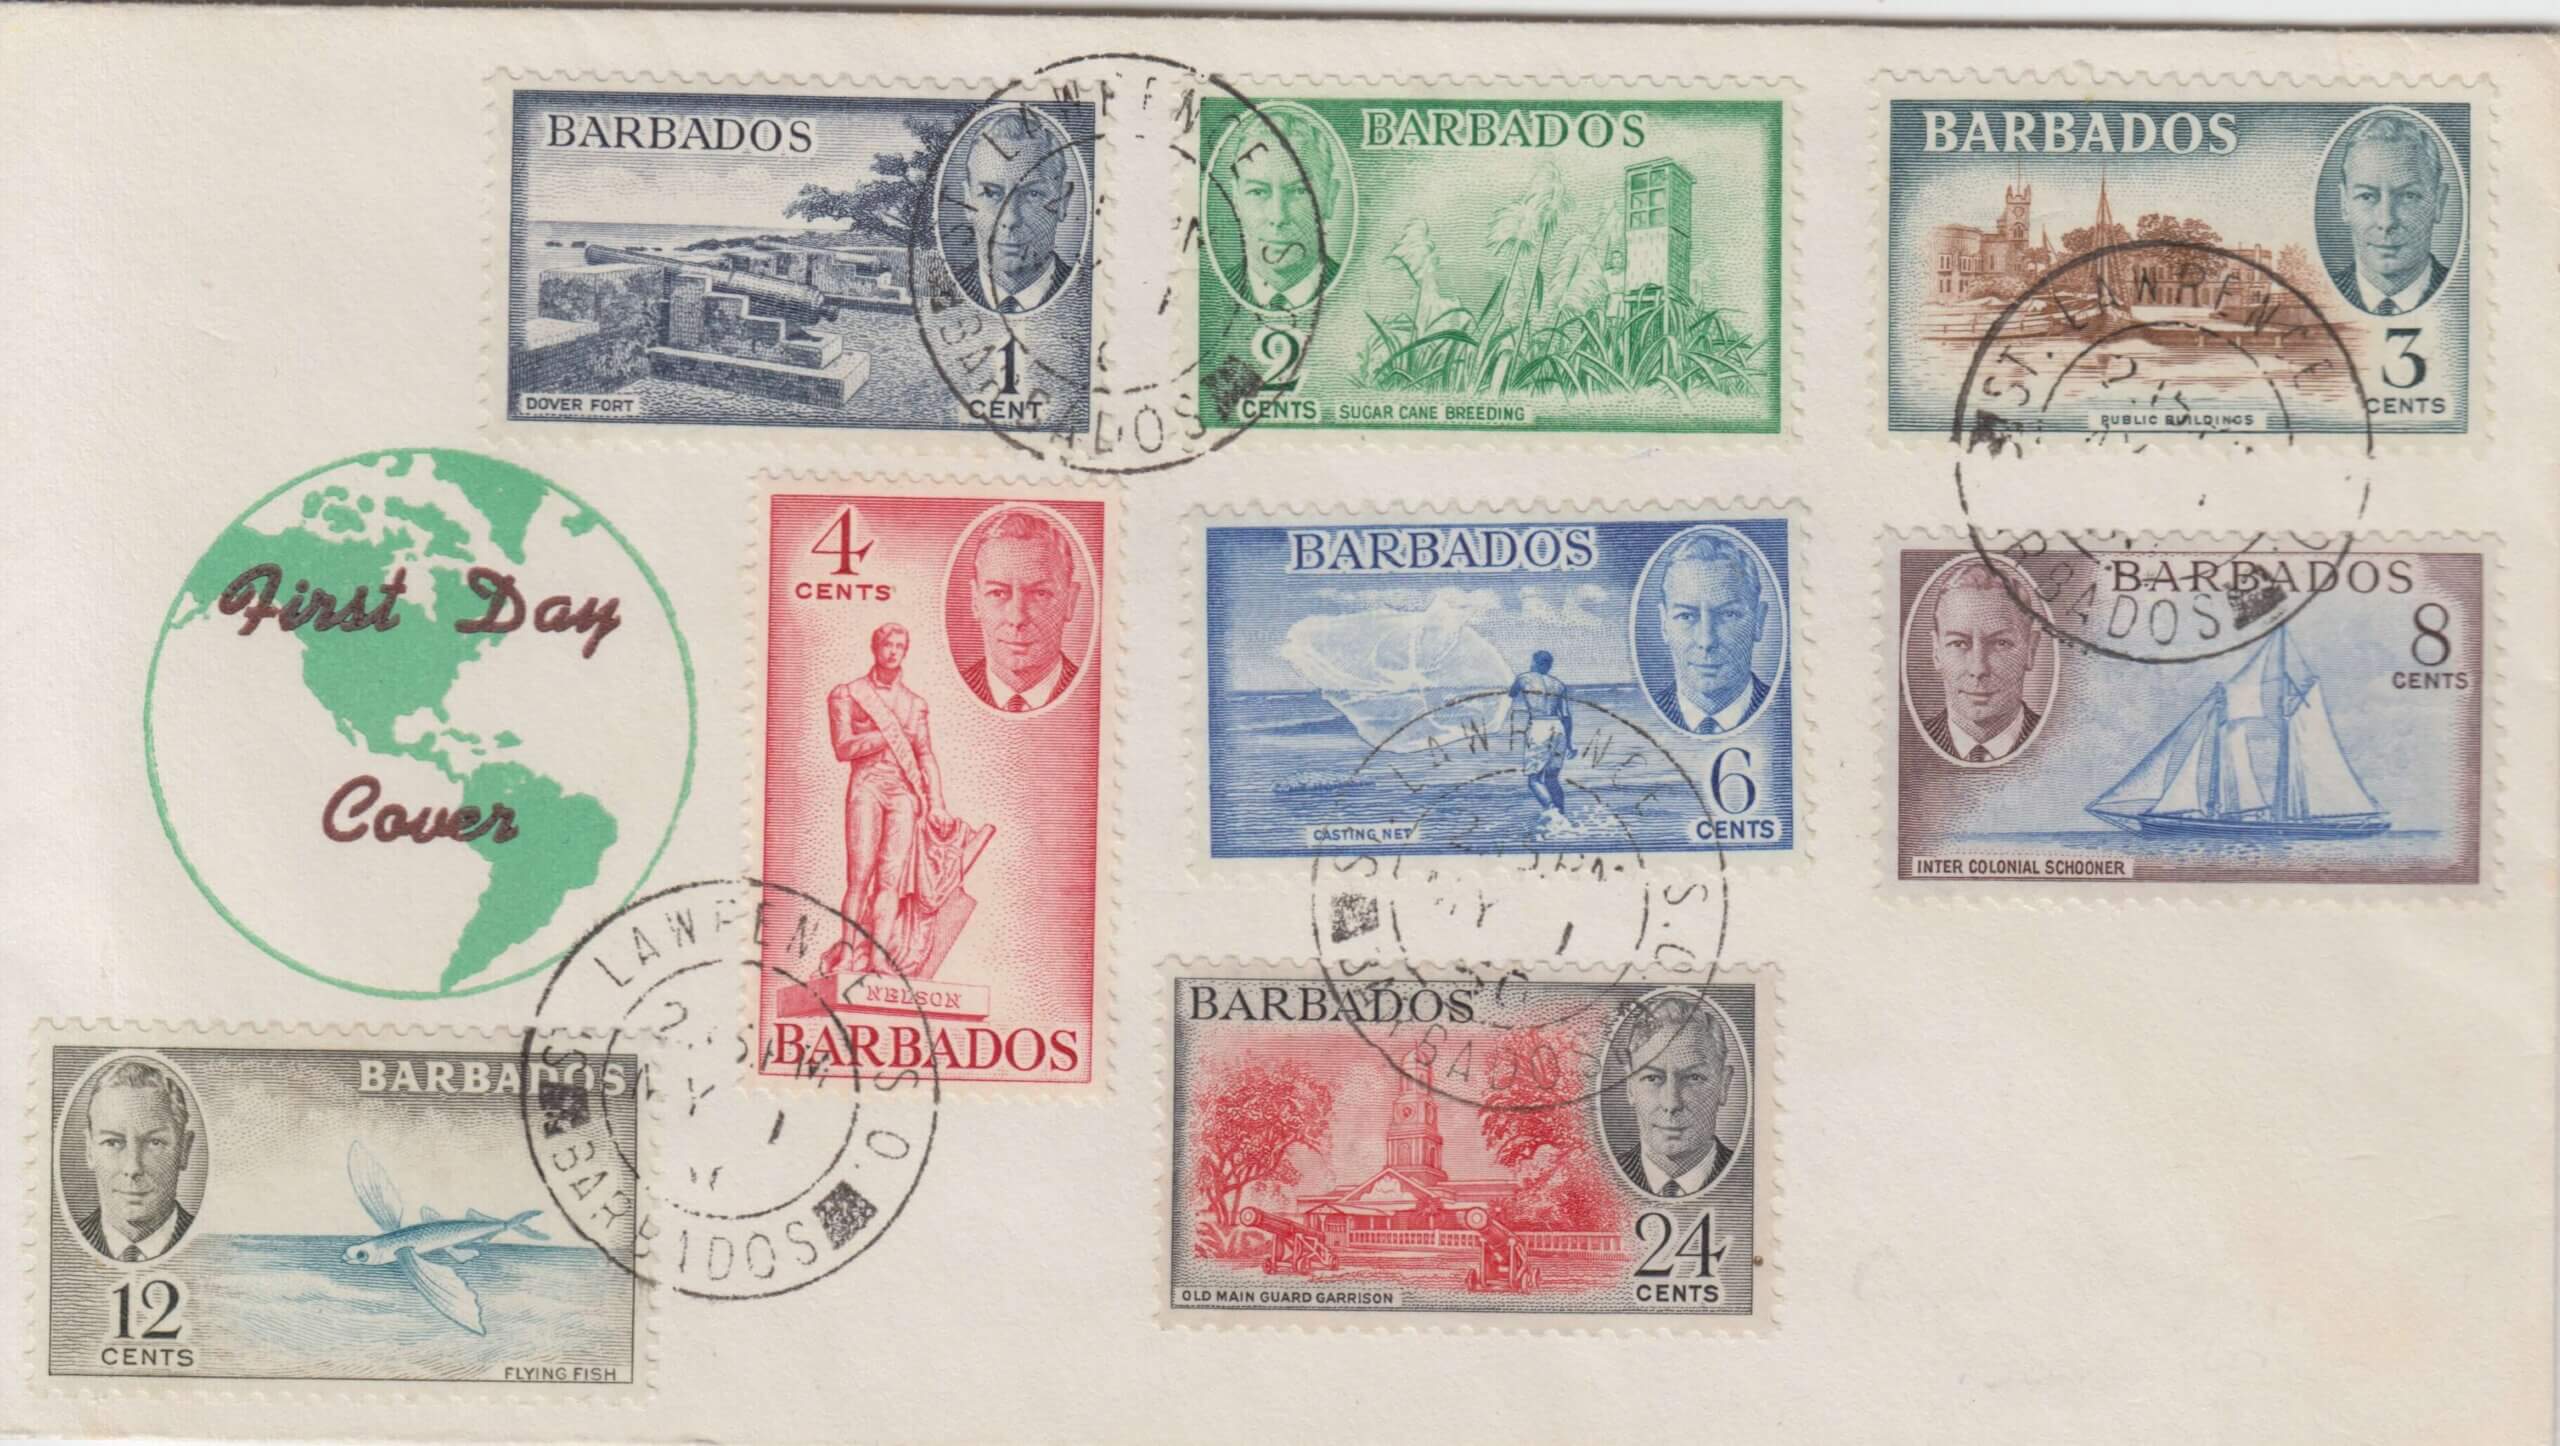 Barbados George VI First Day Cover 1950 - low values